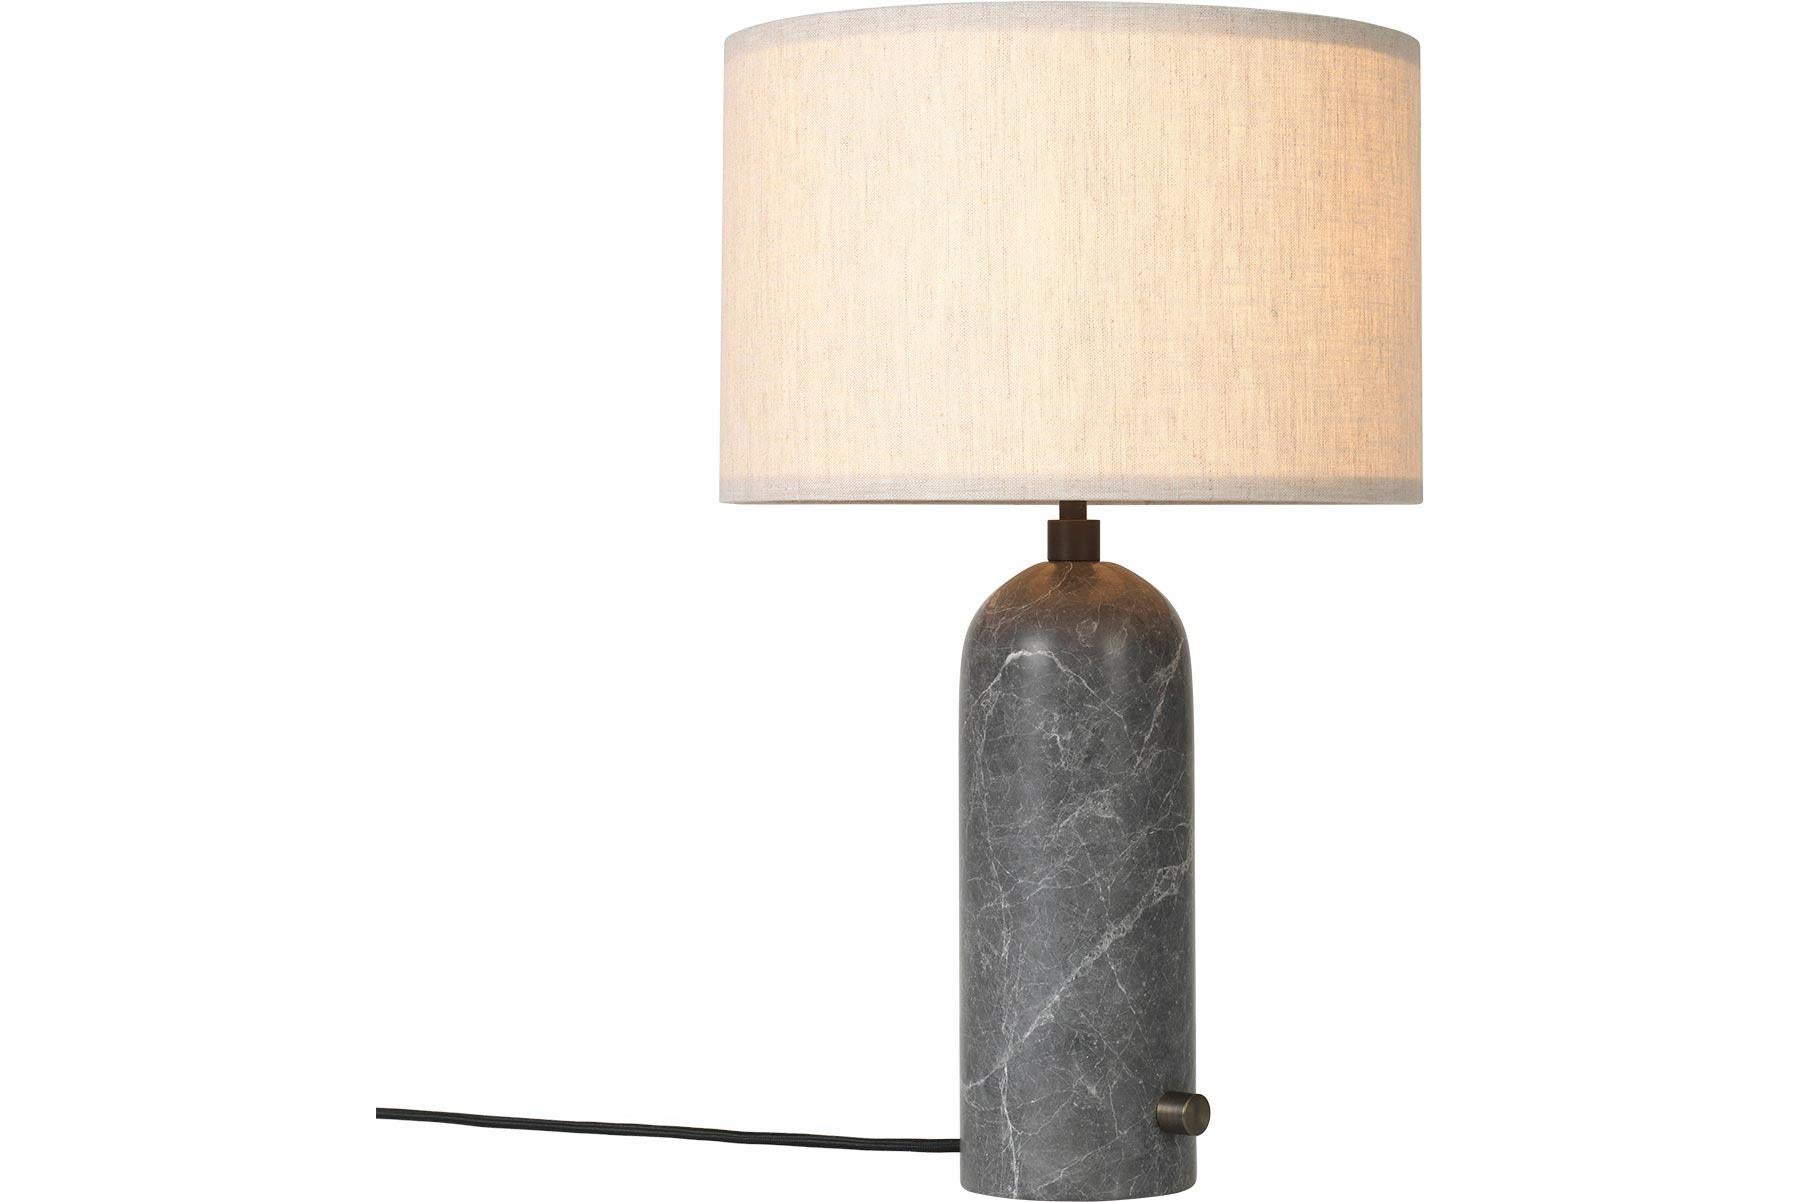 Gravity Table Lamp - Small, Grey Marble, White. For Sale 5